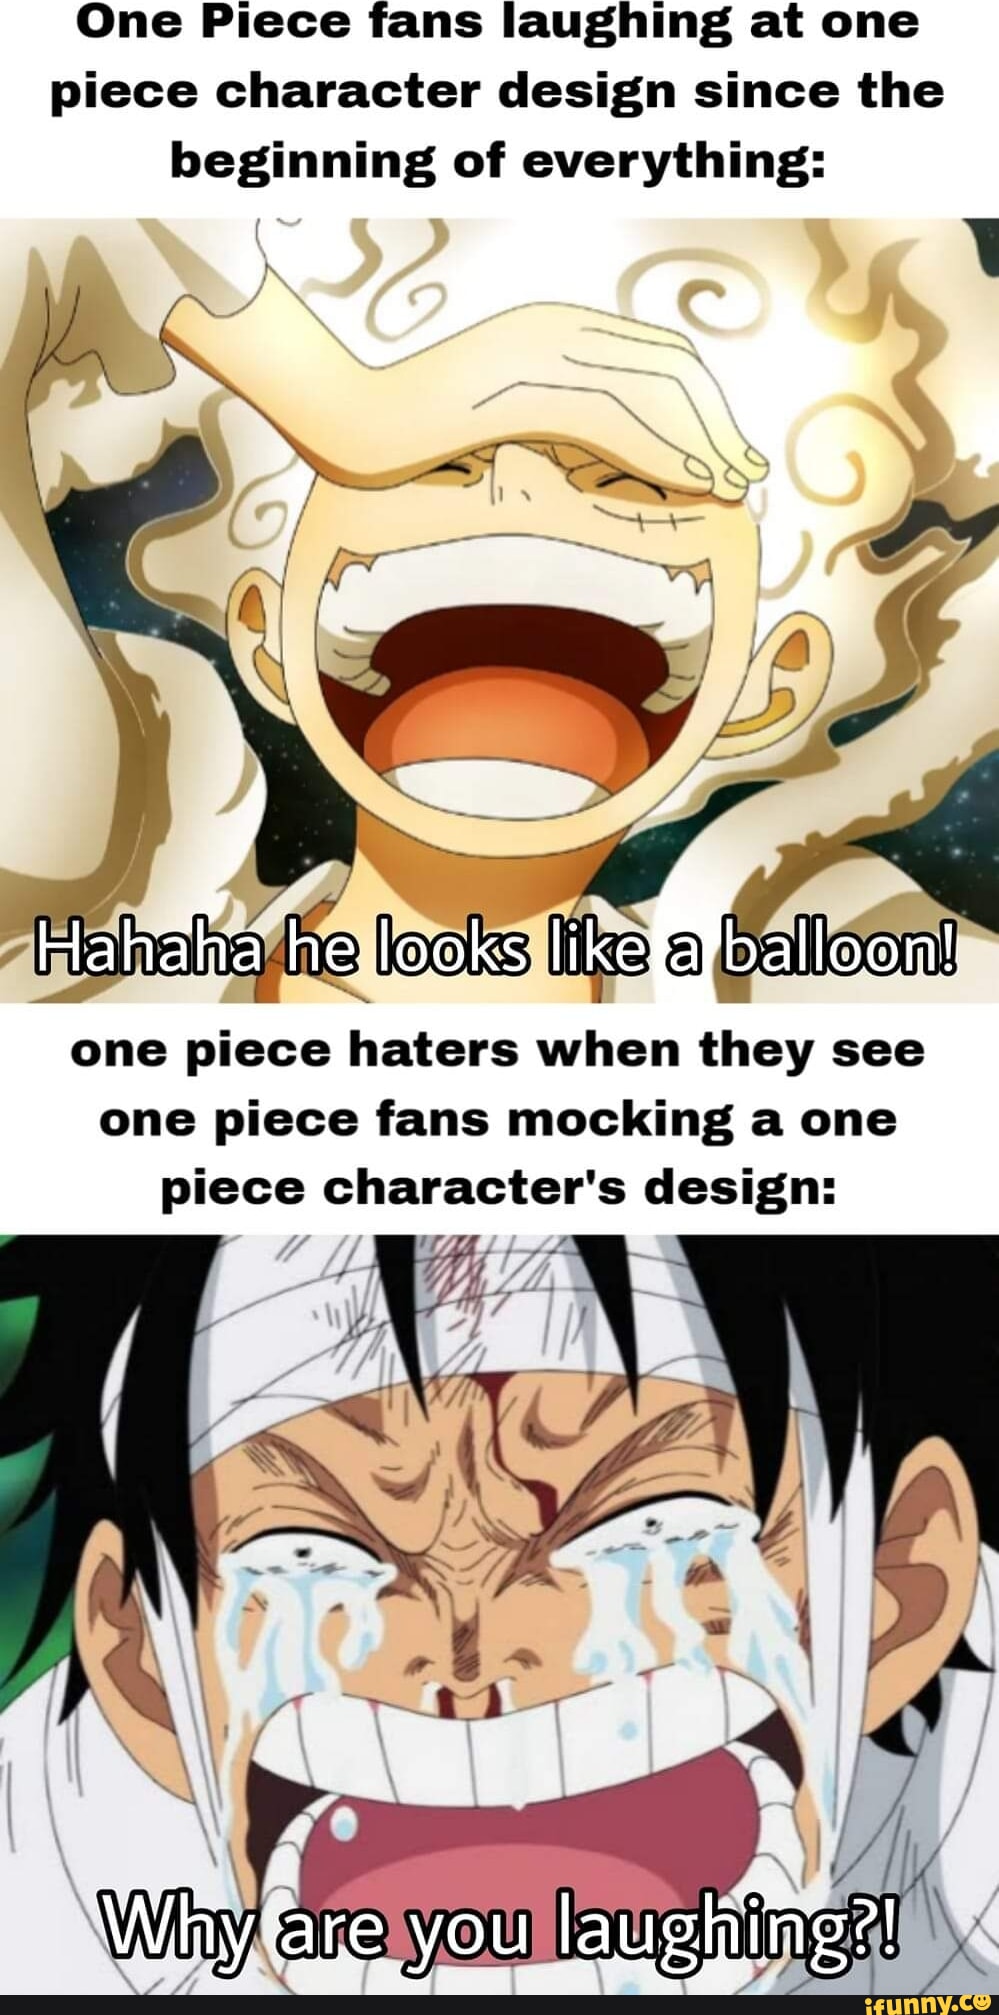 Here's a Weird Scene in One Piece 1026 that Fans Hate!